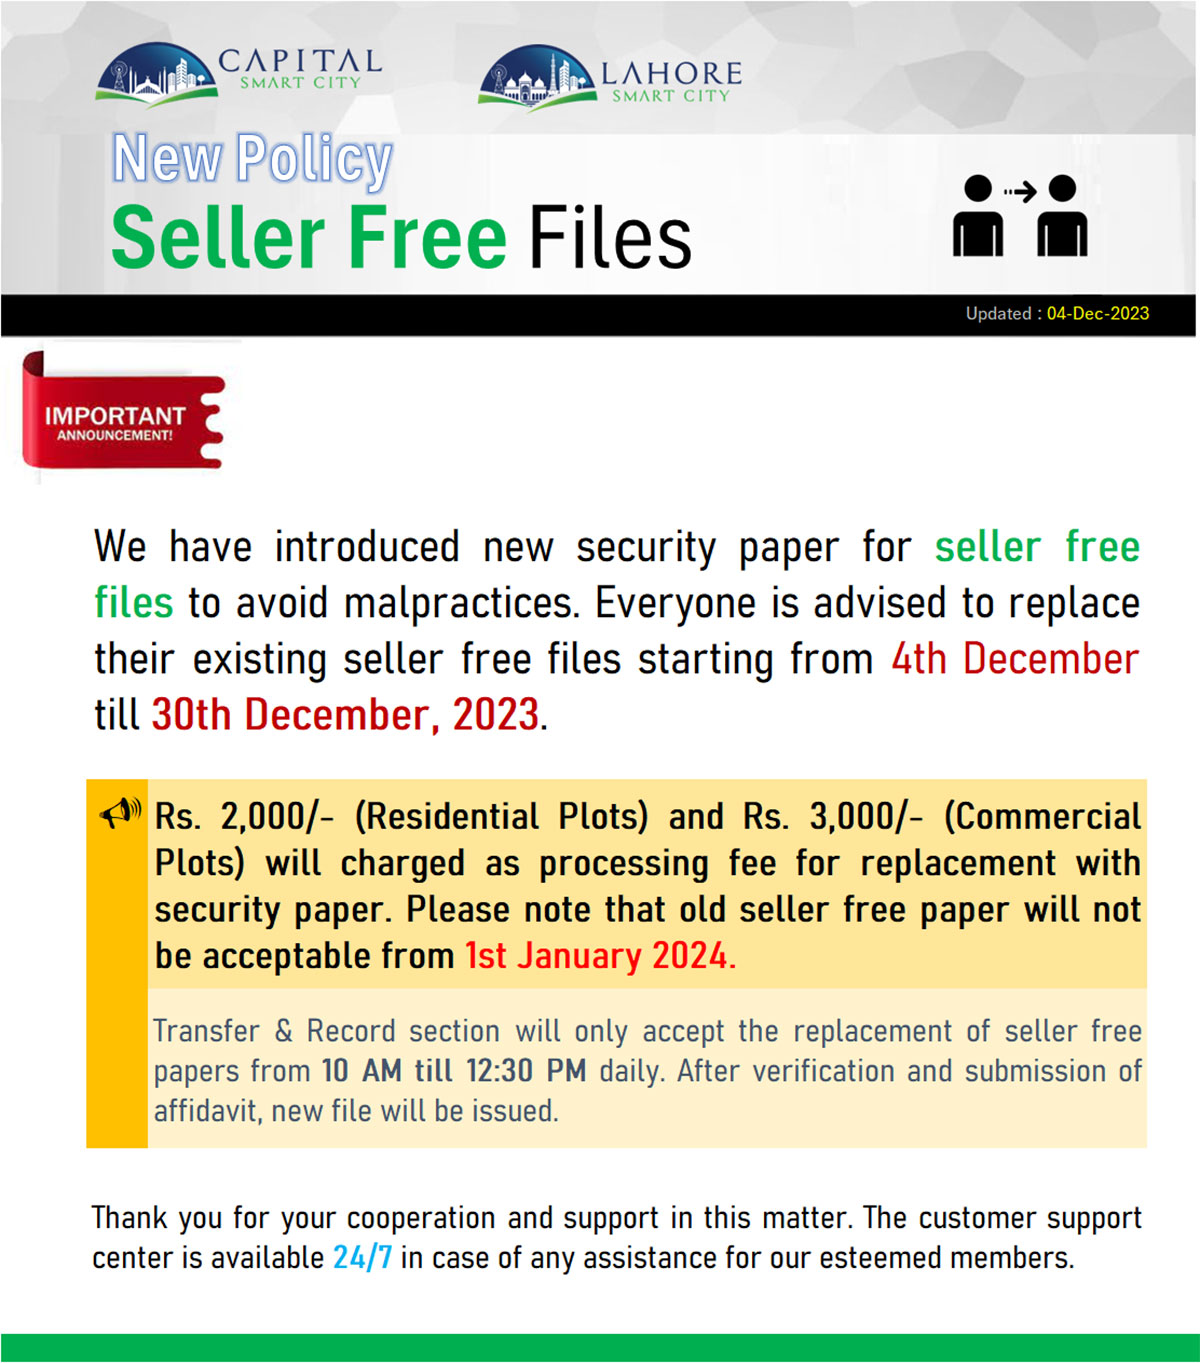 New Policy for Seller Free Files